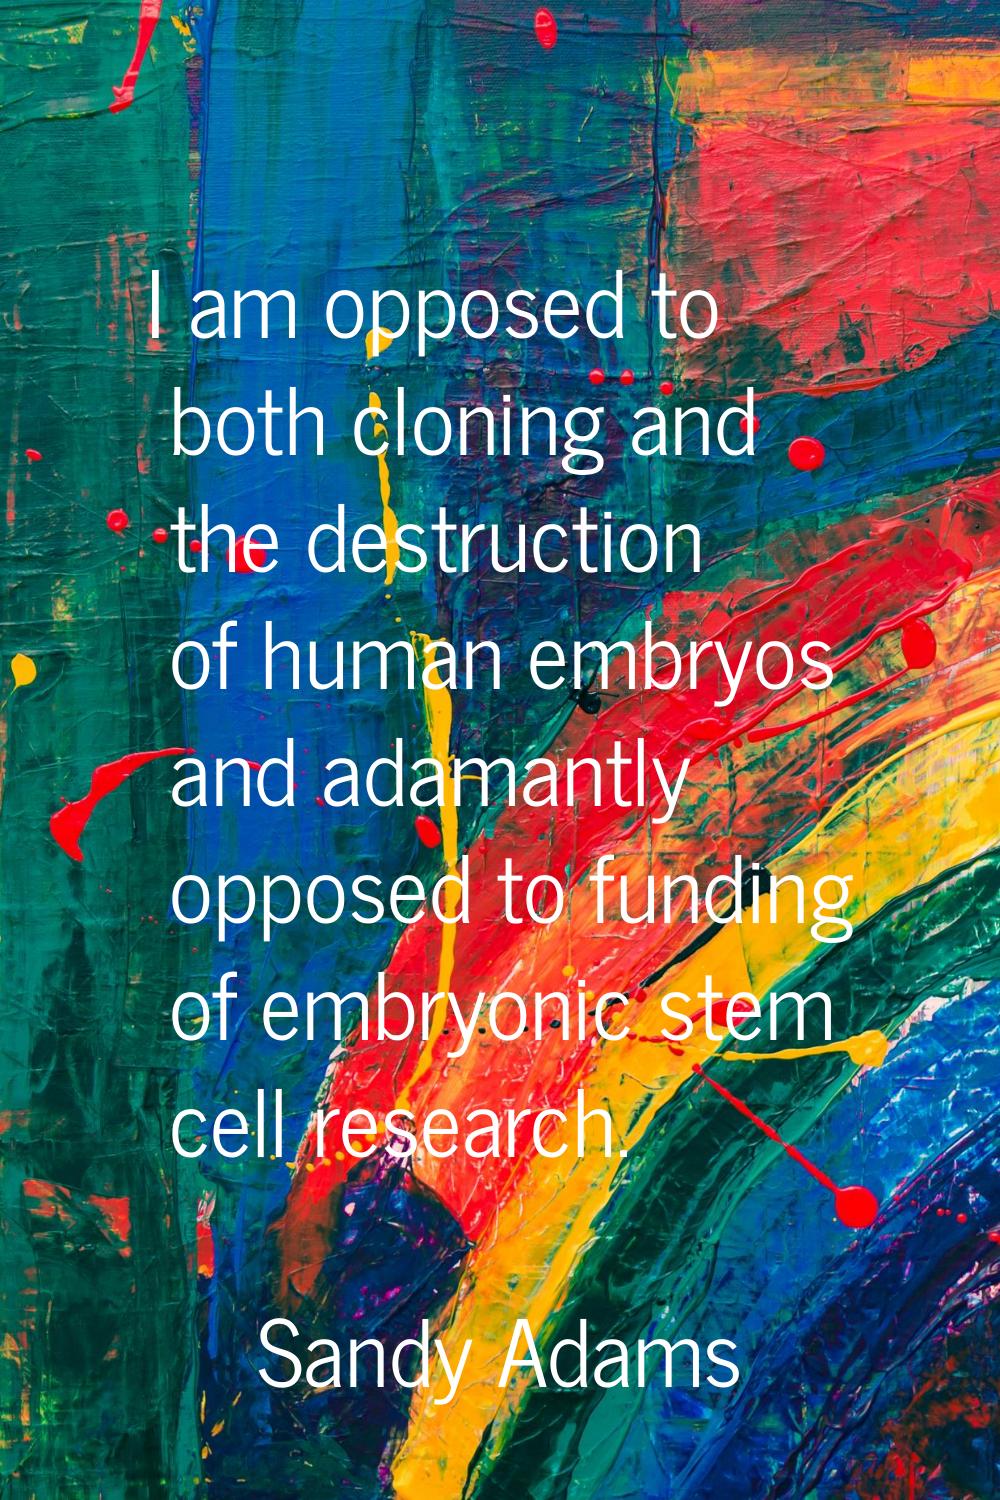 I am opposed to both cloning and the destruction of human embryos and adamantly opposed to funding 